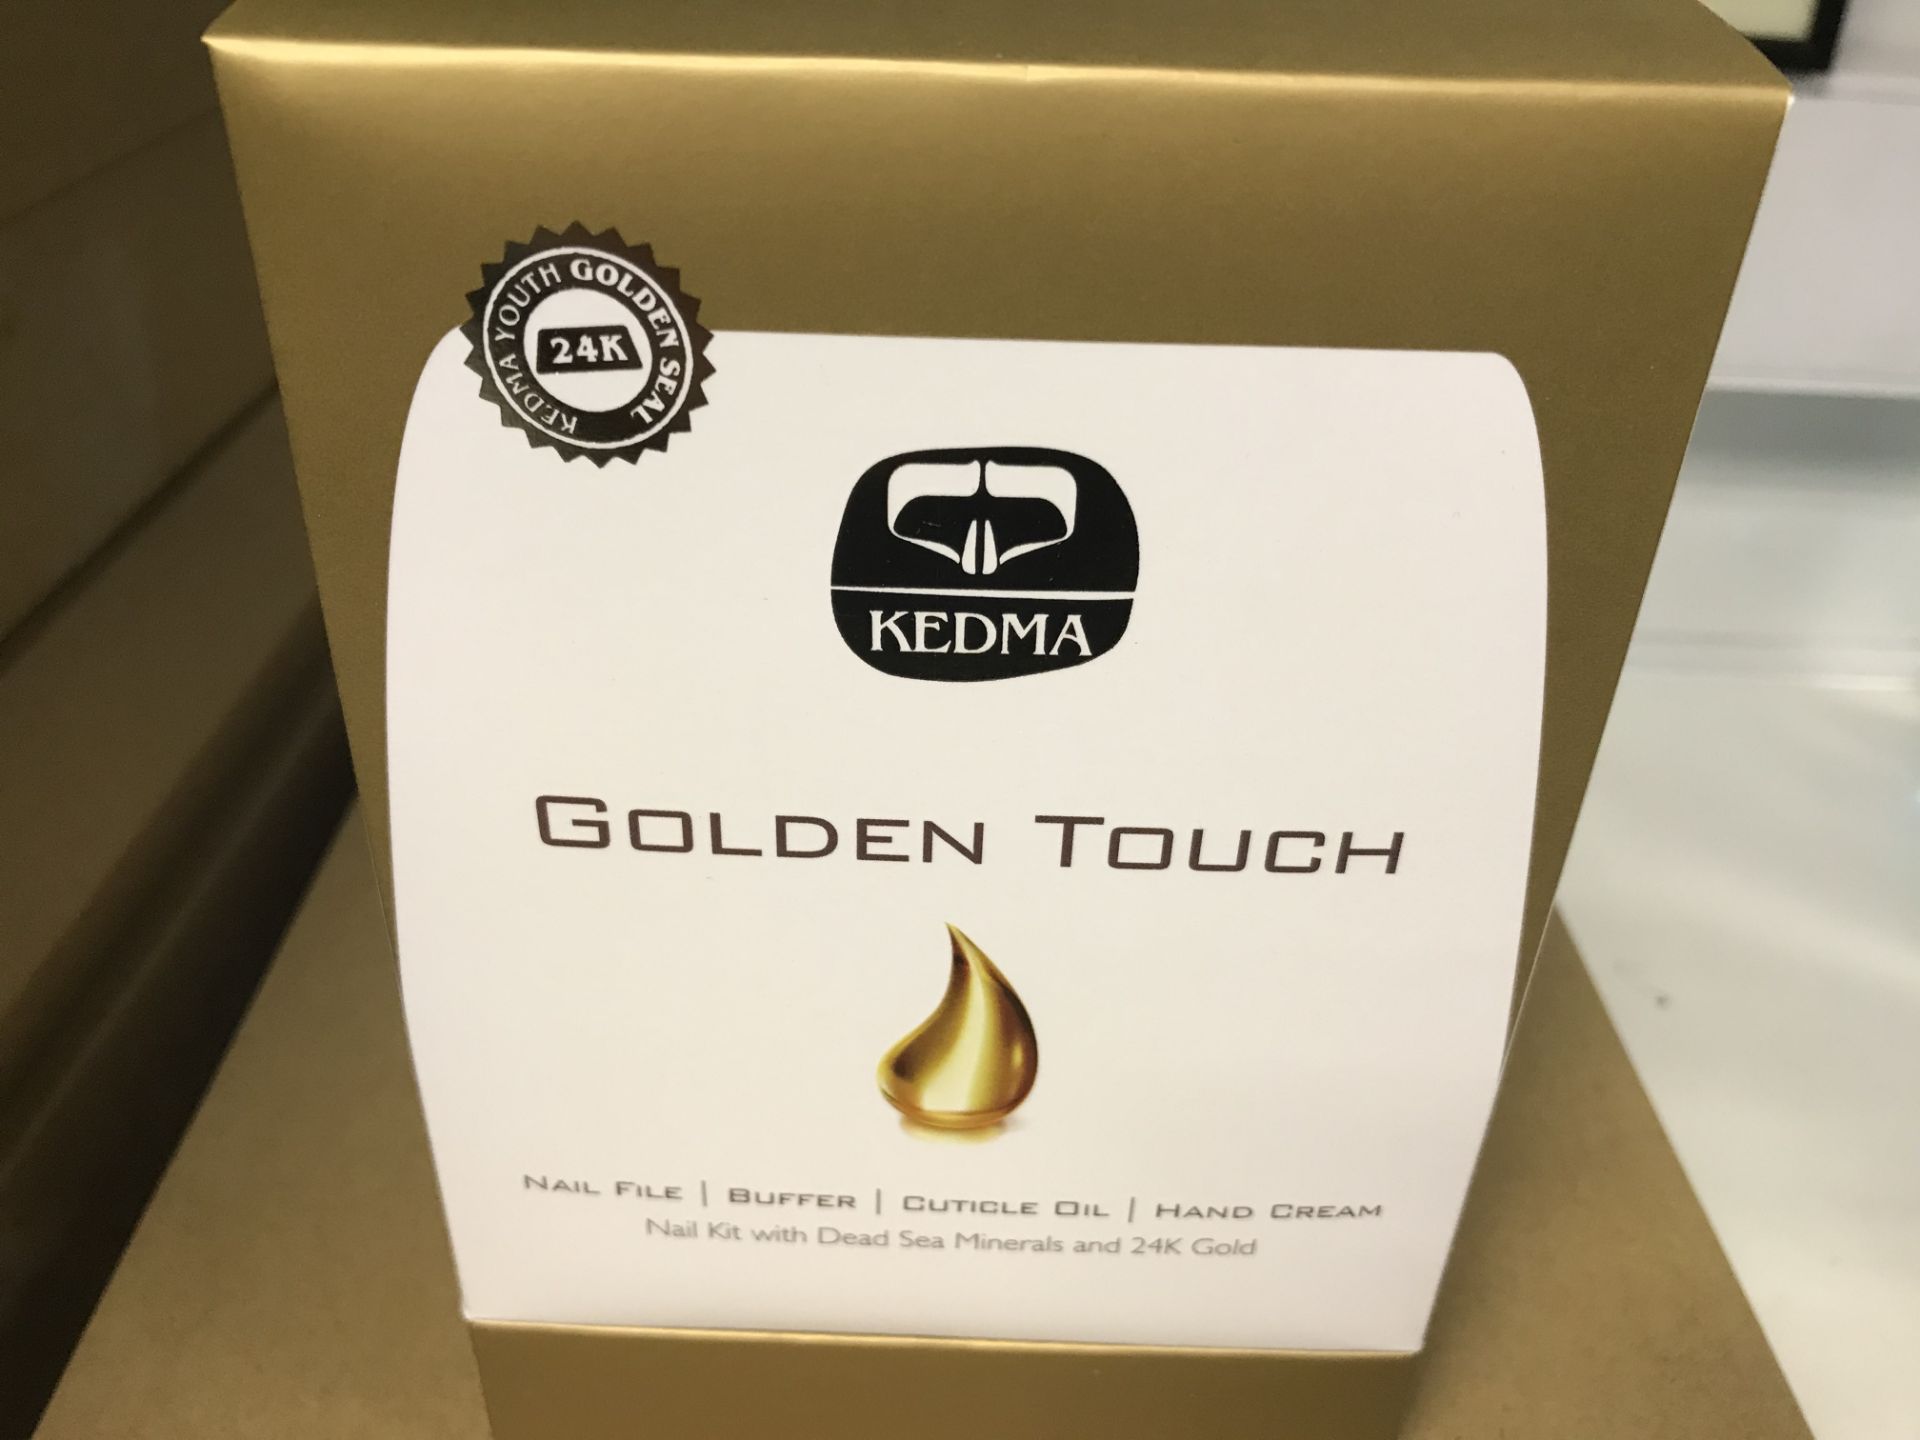 KEDMA GOLDEN TOUCH NAIL KIT WITH DEAD SEA MINERALS AND 24K GOLD, EACH SET CONTAINS NAIL FILE,